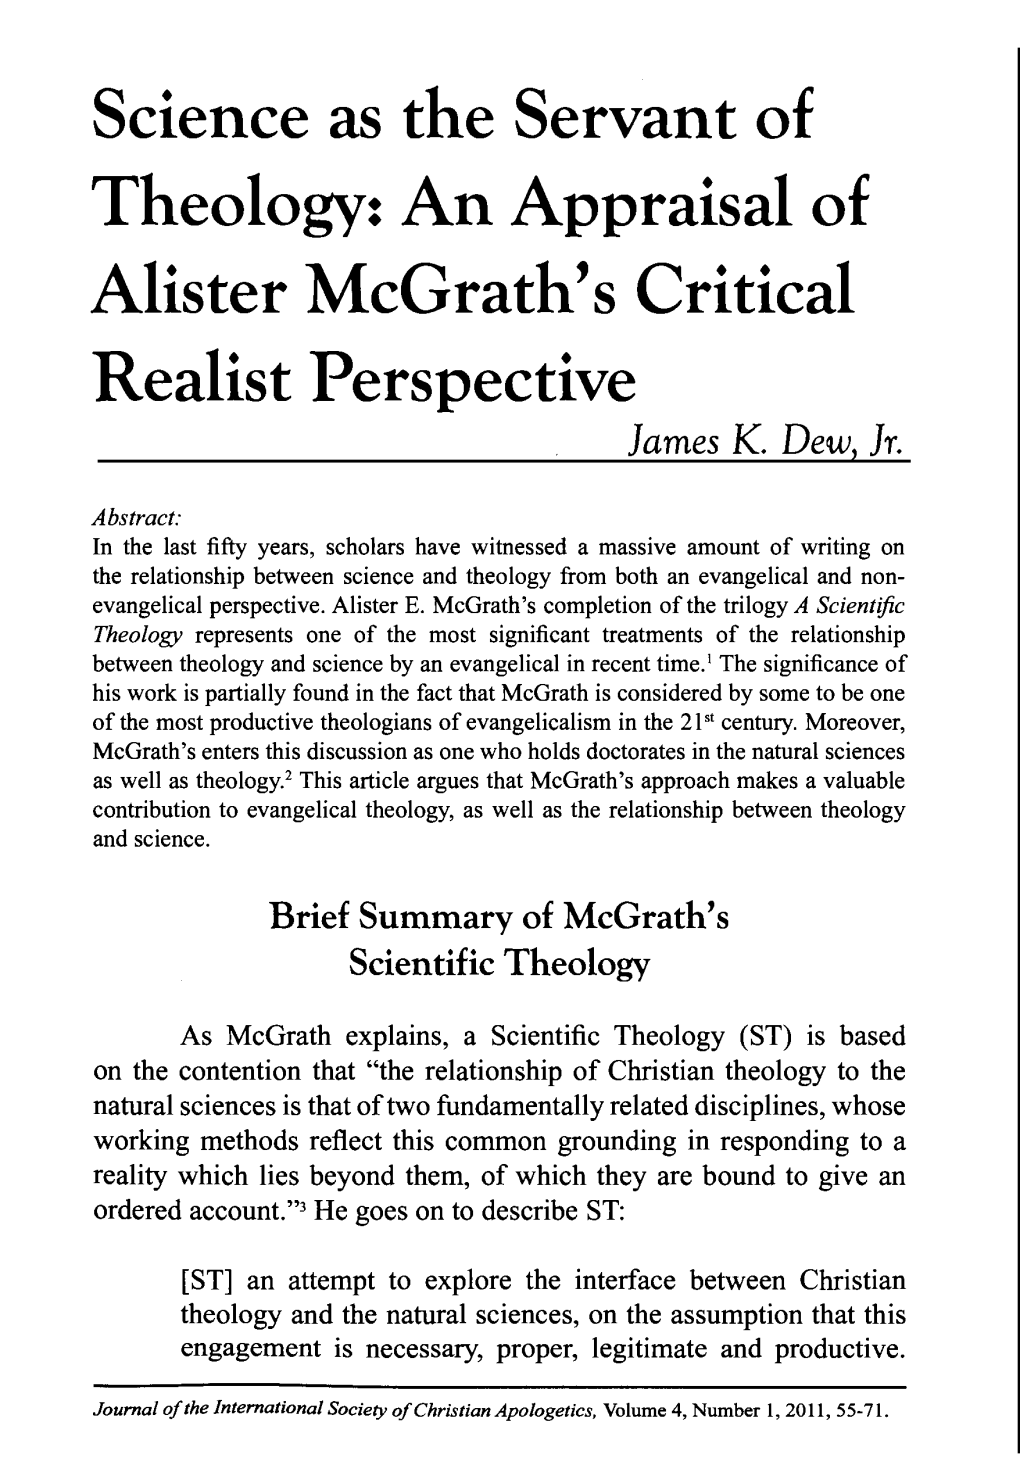 Science As the Servant of Theology: an Appraisal of Alister Mcgrath's Critical Realist Perspective James K